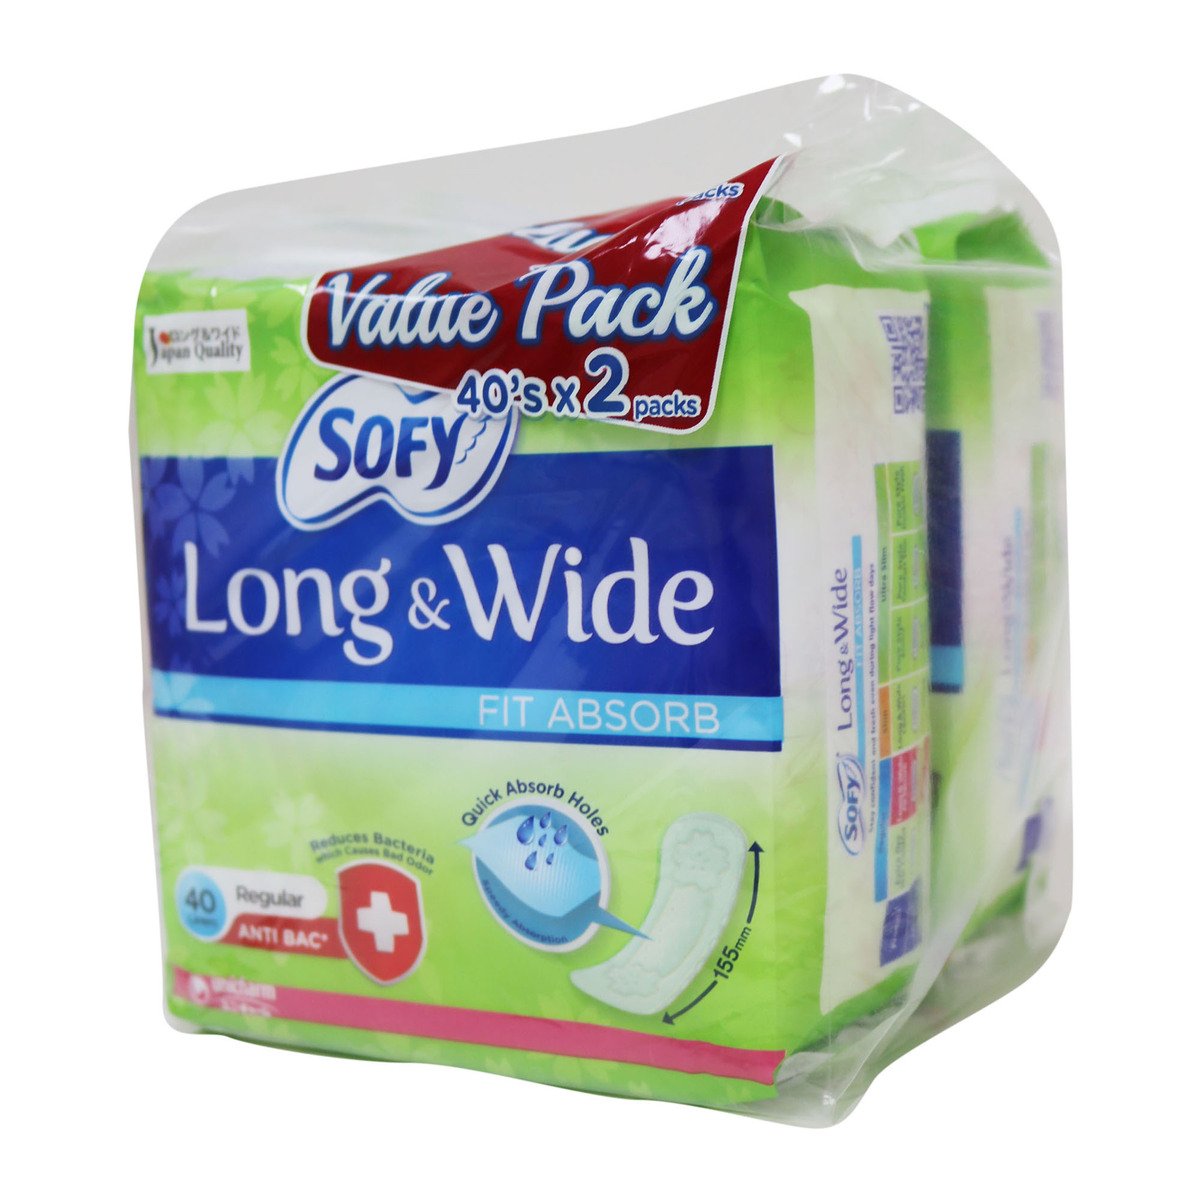 Sofy Panty Liner Long & Wide Fit Absorb (S) 40 Counts Twin Pack